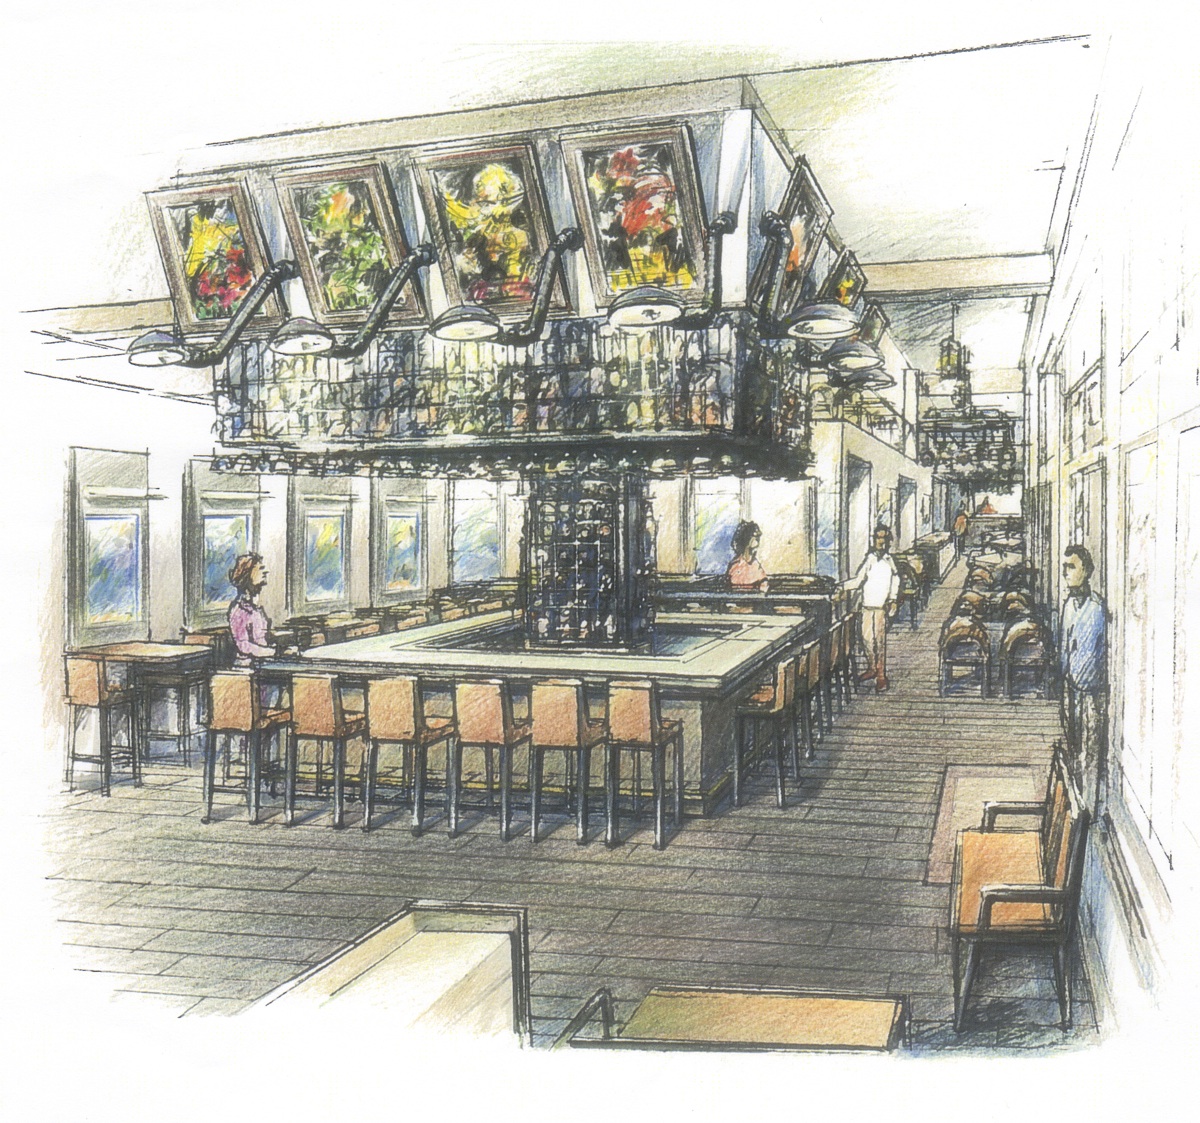 A rendering of Brasserie du Parc, coming this Fall to Downtown